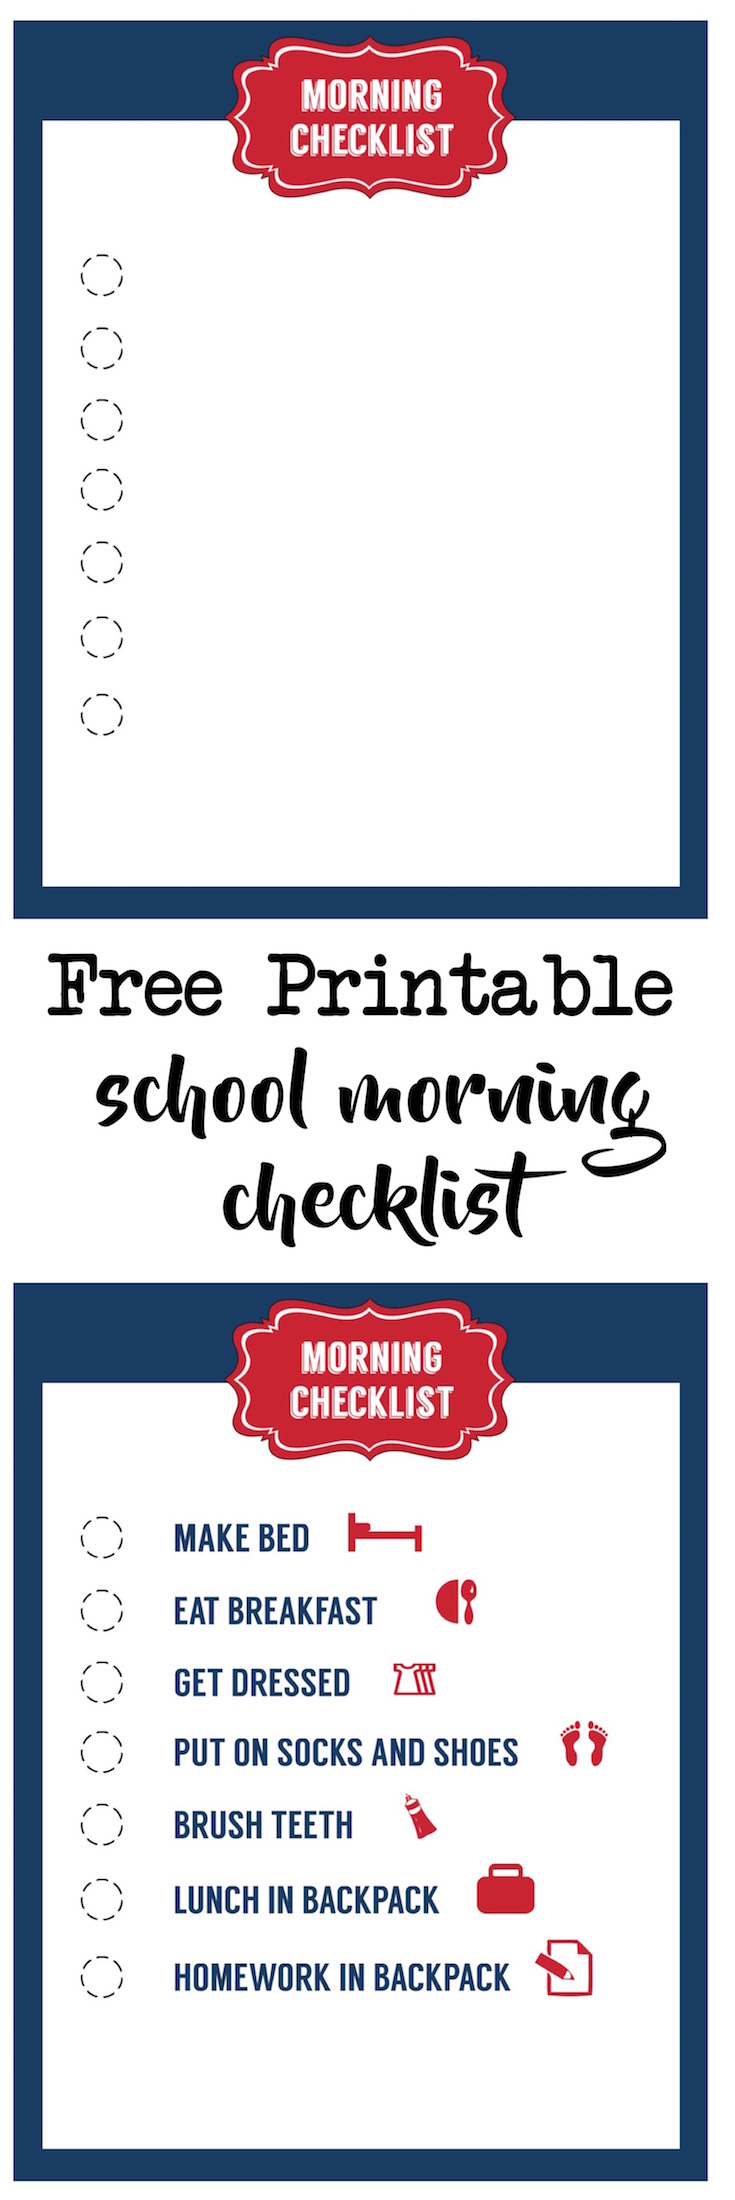 School morning routine checklist free printable. Help your kids get ready for school faster with this free printable checklist for the morning routine. Or edit out blank list for your own custom checklist.